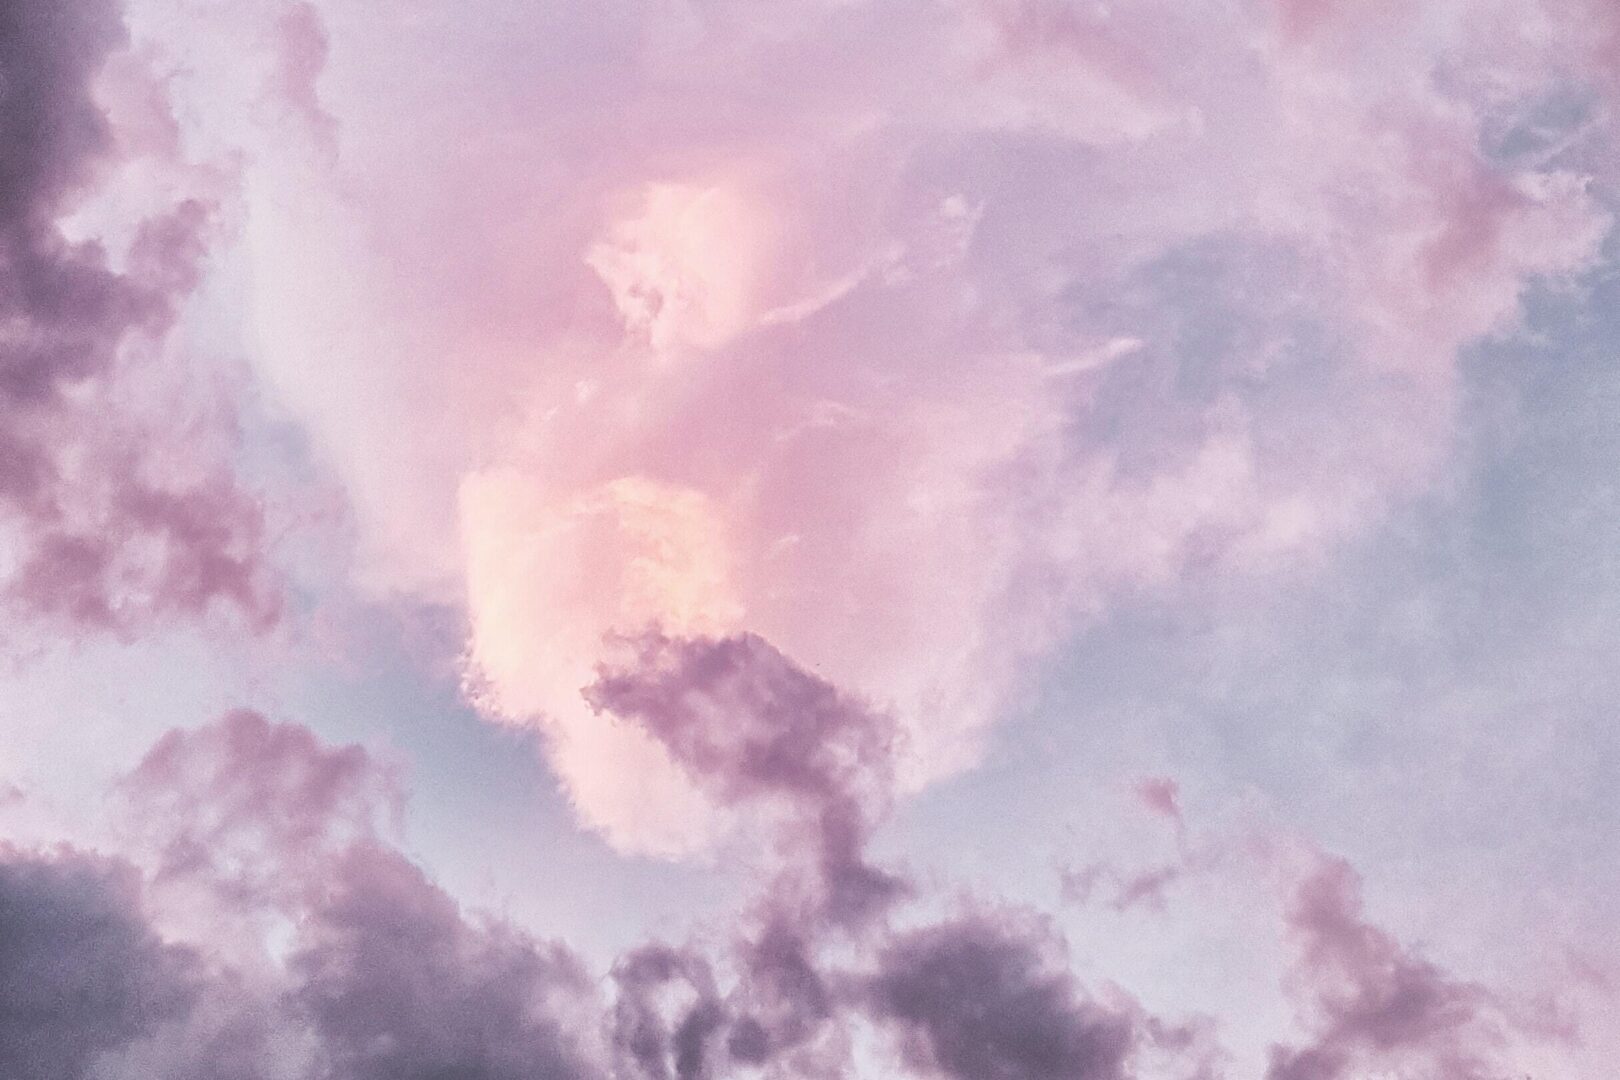 A pink cloud is in the sky with purple clouds.